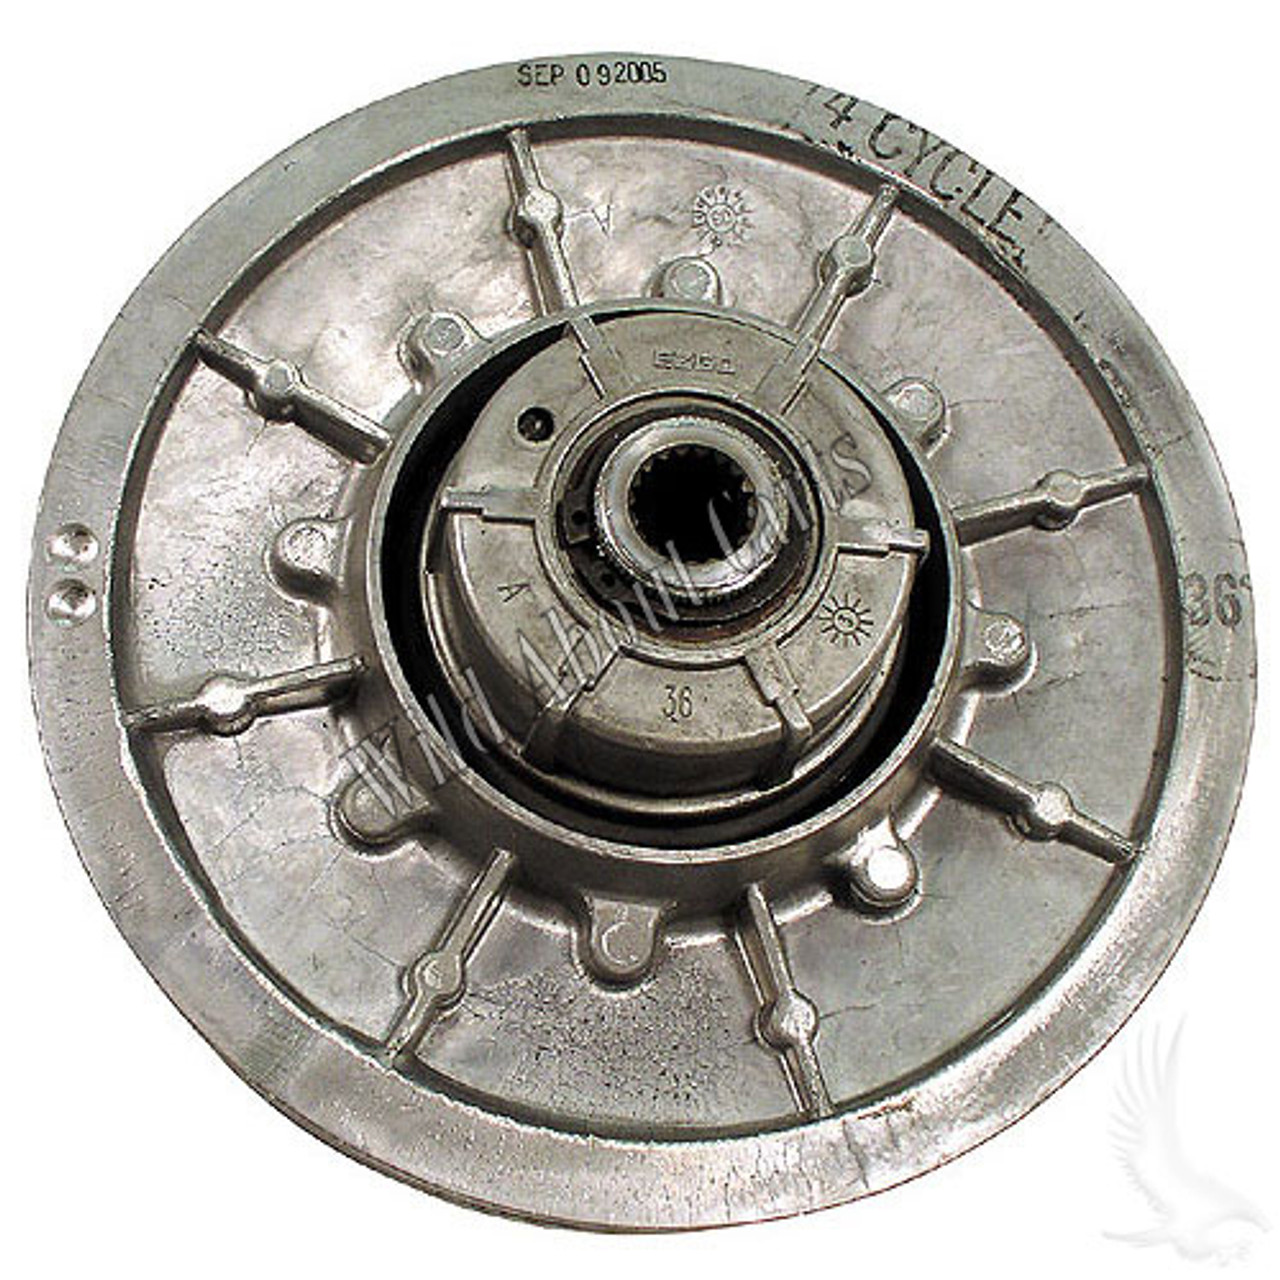 Driven Clutch EZGO Golf Cart (2-Cycle Gas 1989-1994, 4-Cycle Gas 1991-Up), CP-0026, 25244G1, 25632G01, 25632G02, 25632G03, 26301G01, 26301G02, 5528